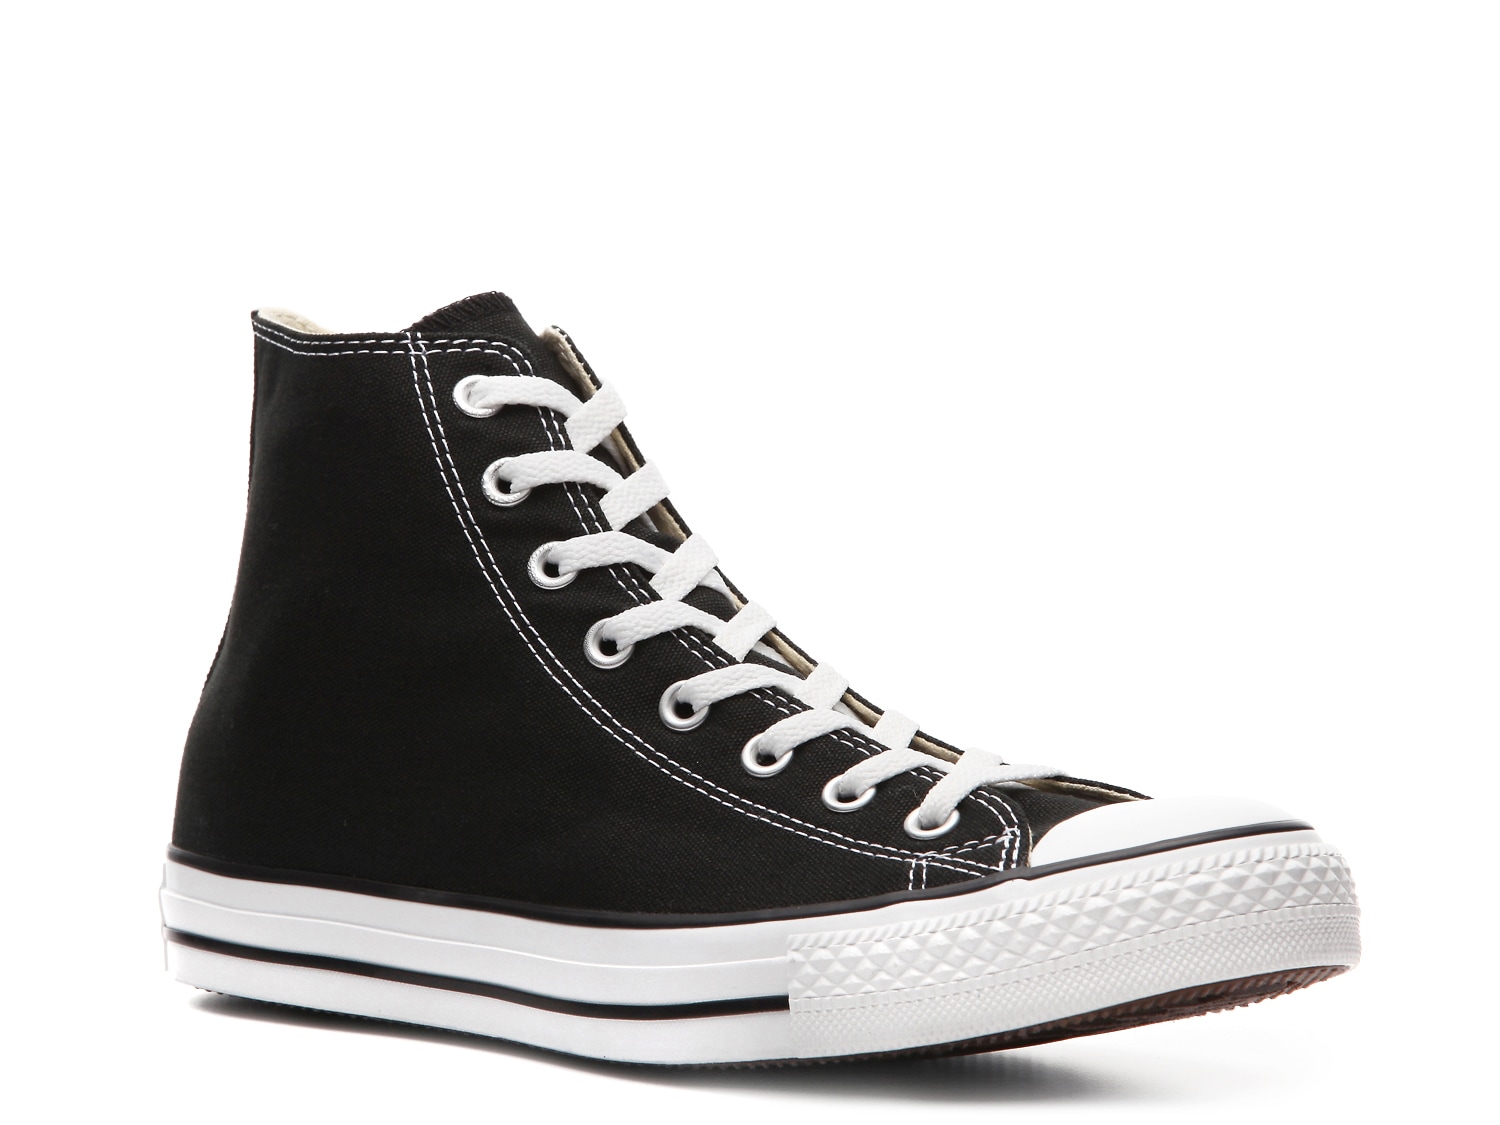 Converse Chuck Taylor All Star High-Top Sneaker - Men's - Free Shipping |  DSW